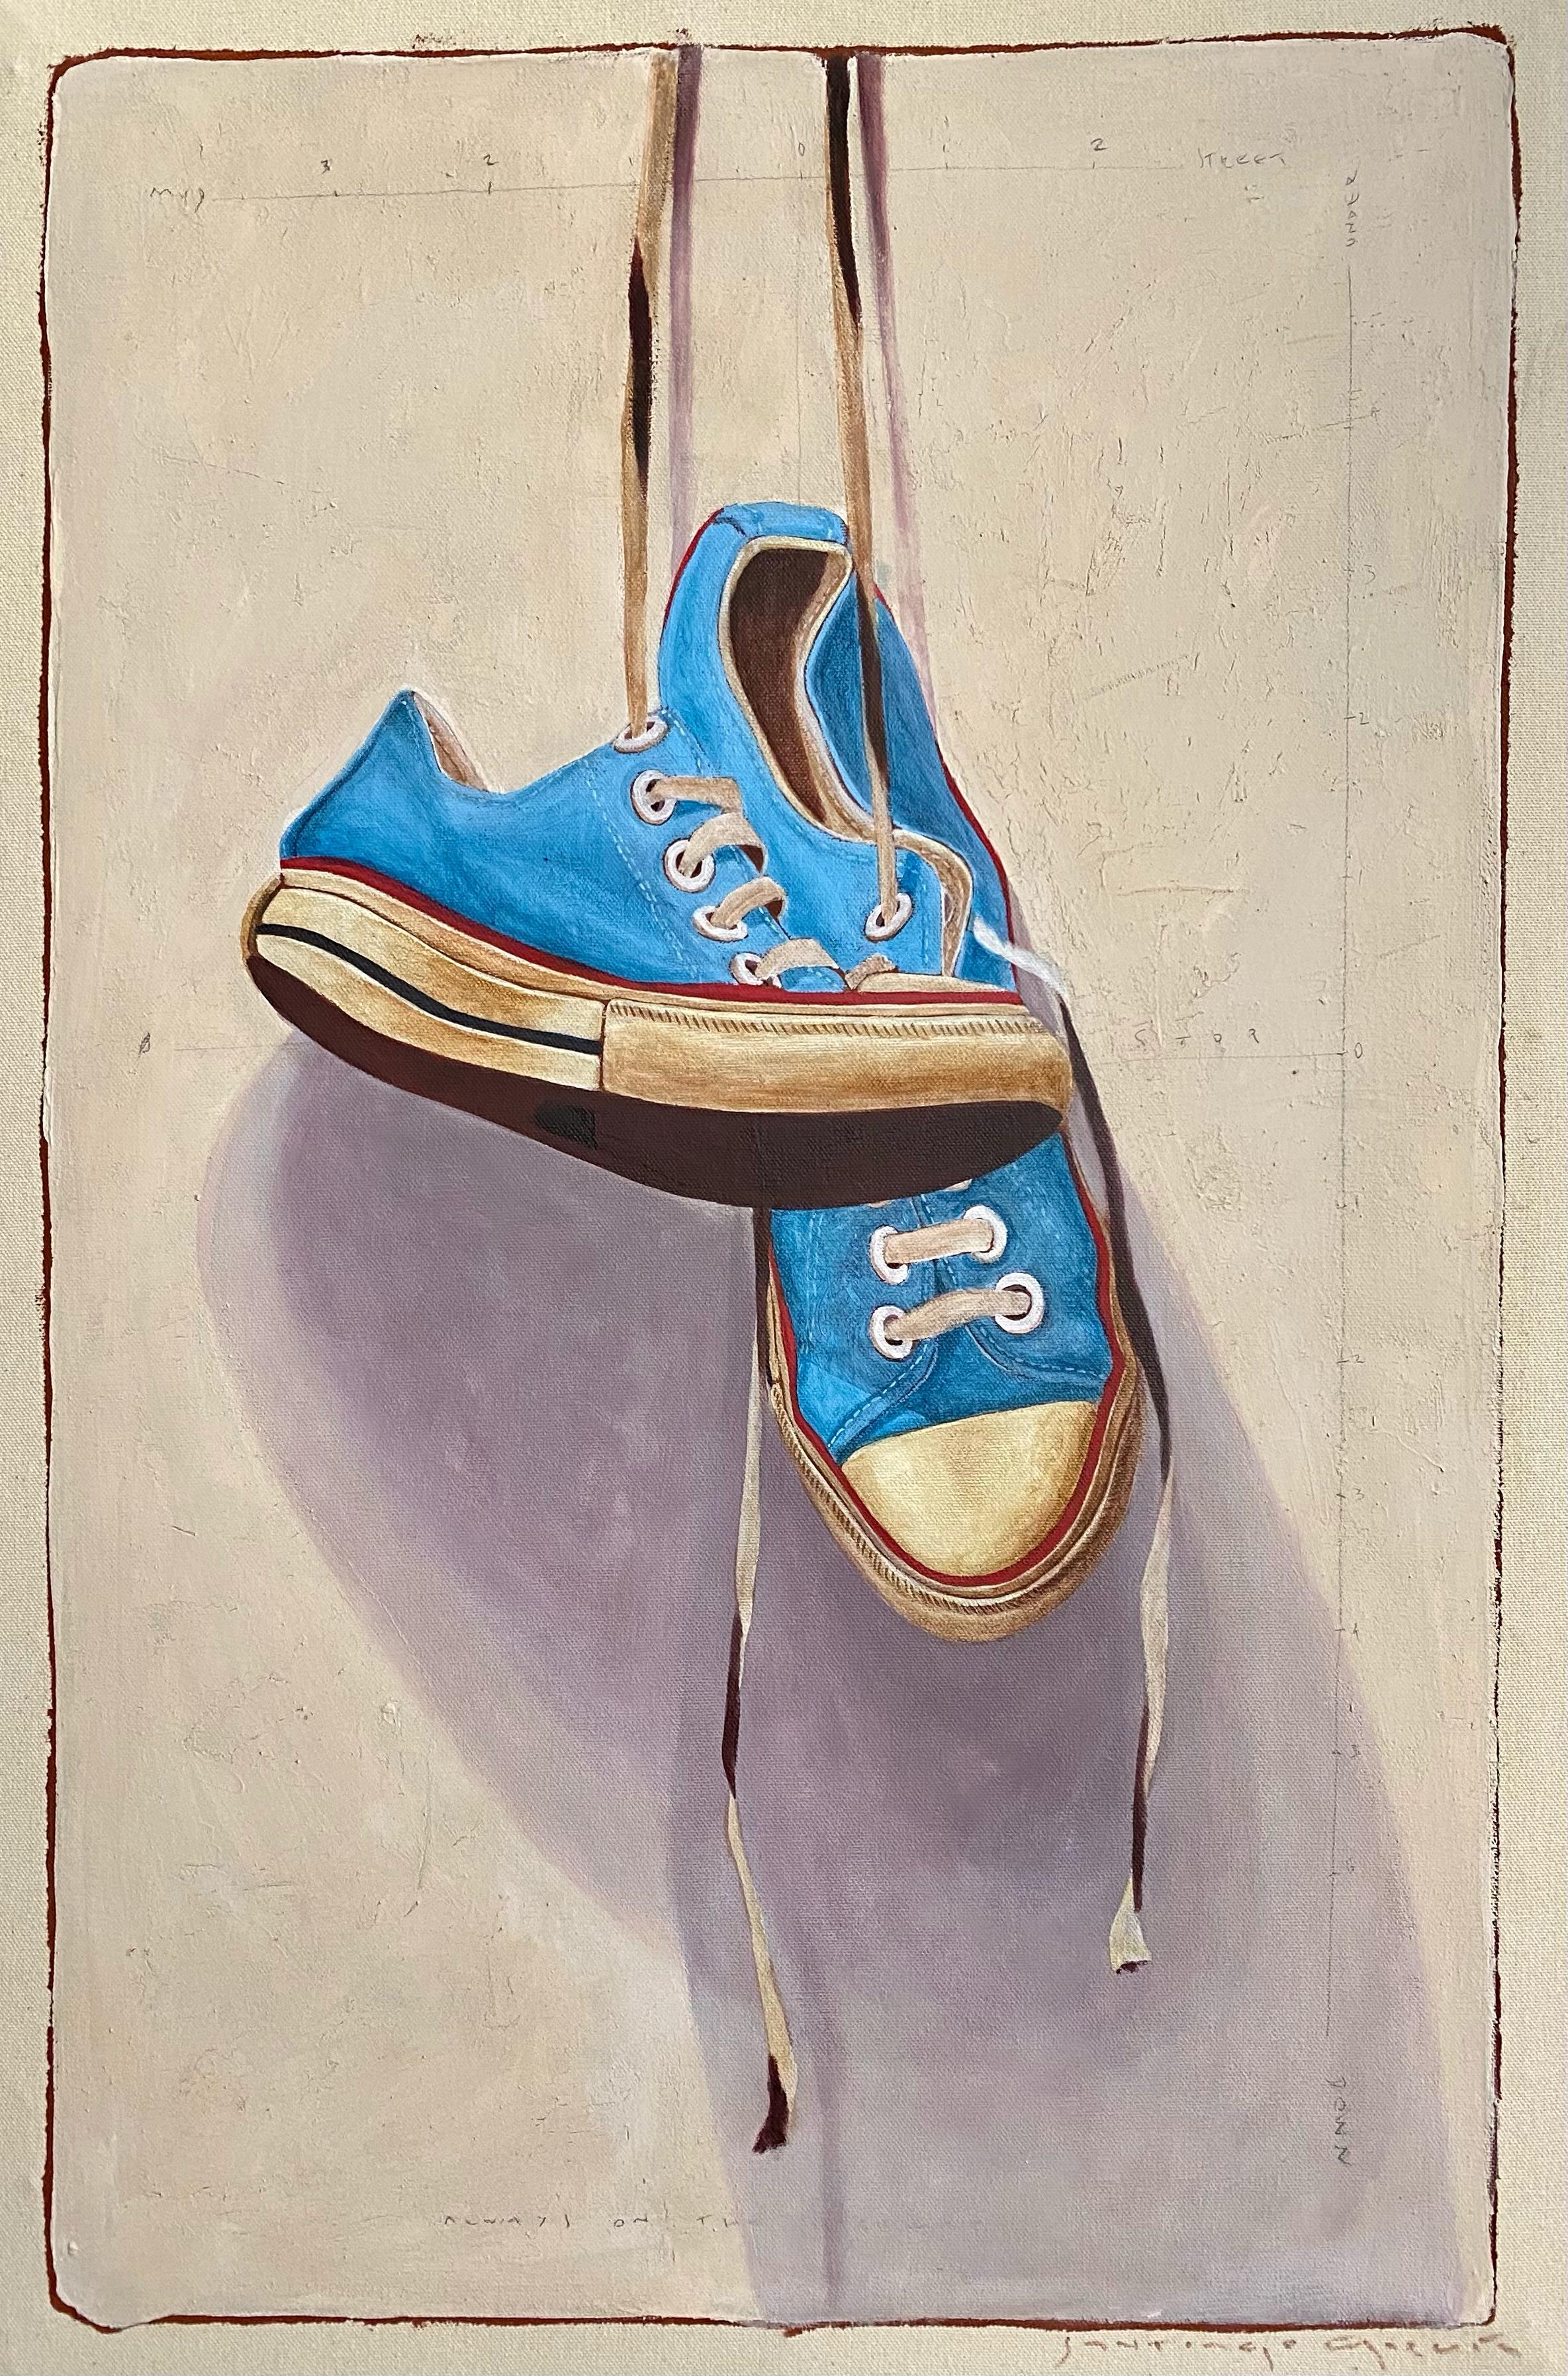 Santiago Garcia Figurative Painting - "#1485" Acrylic painting of blue Converse hanging with white background. 